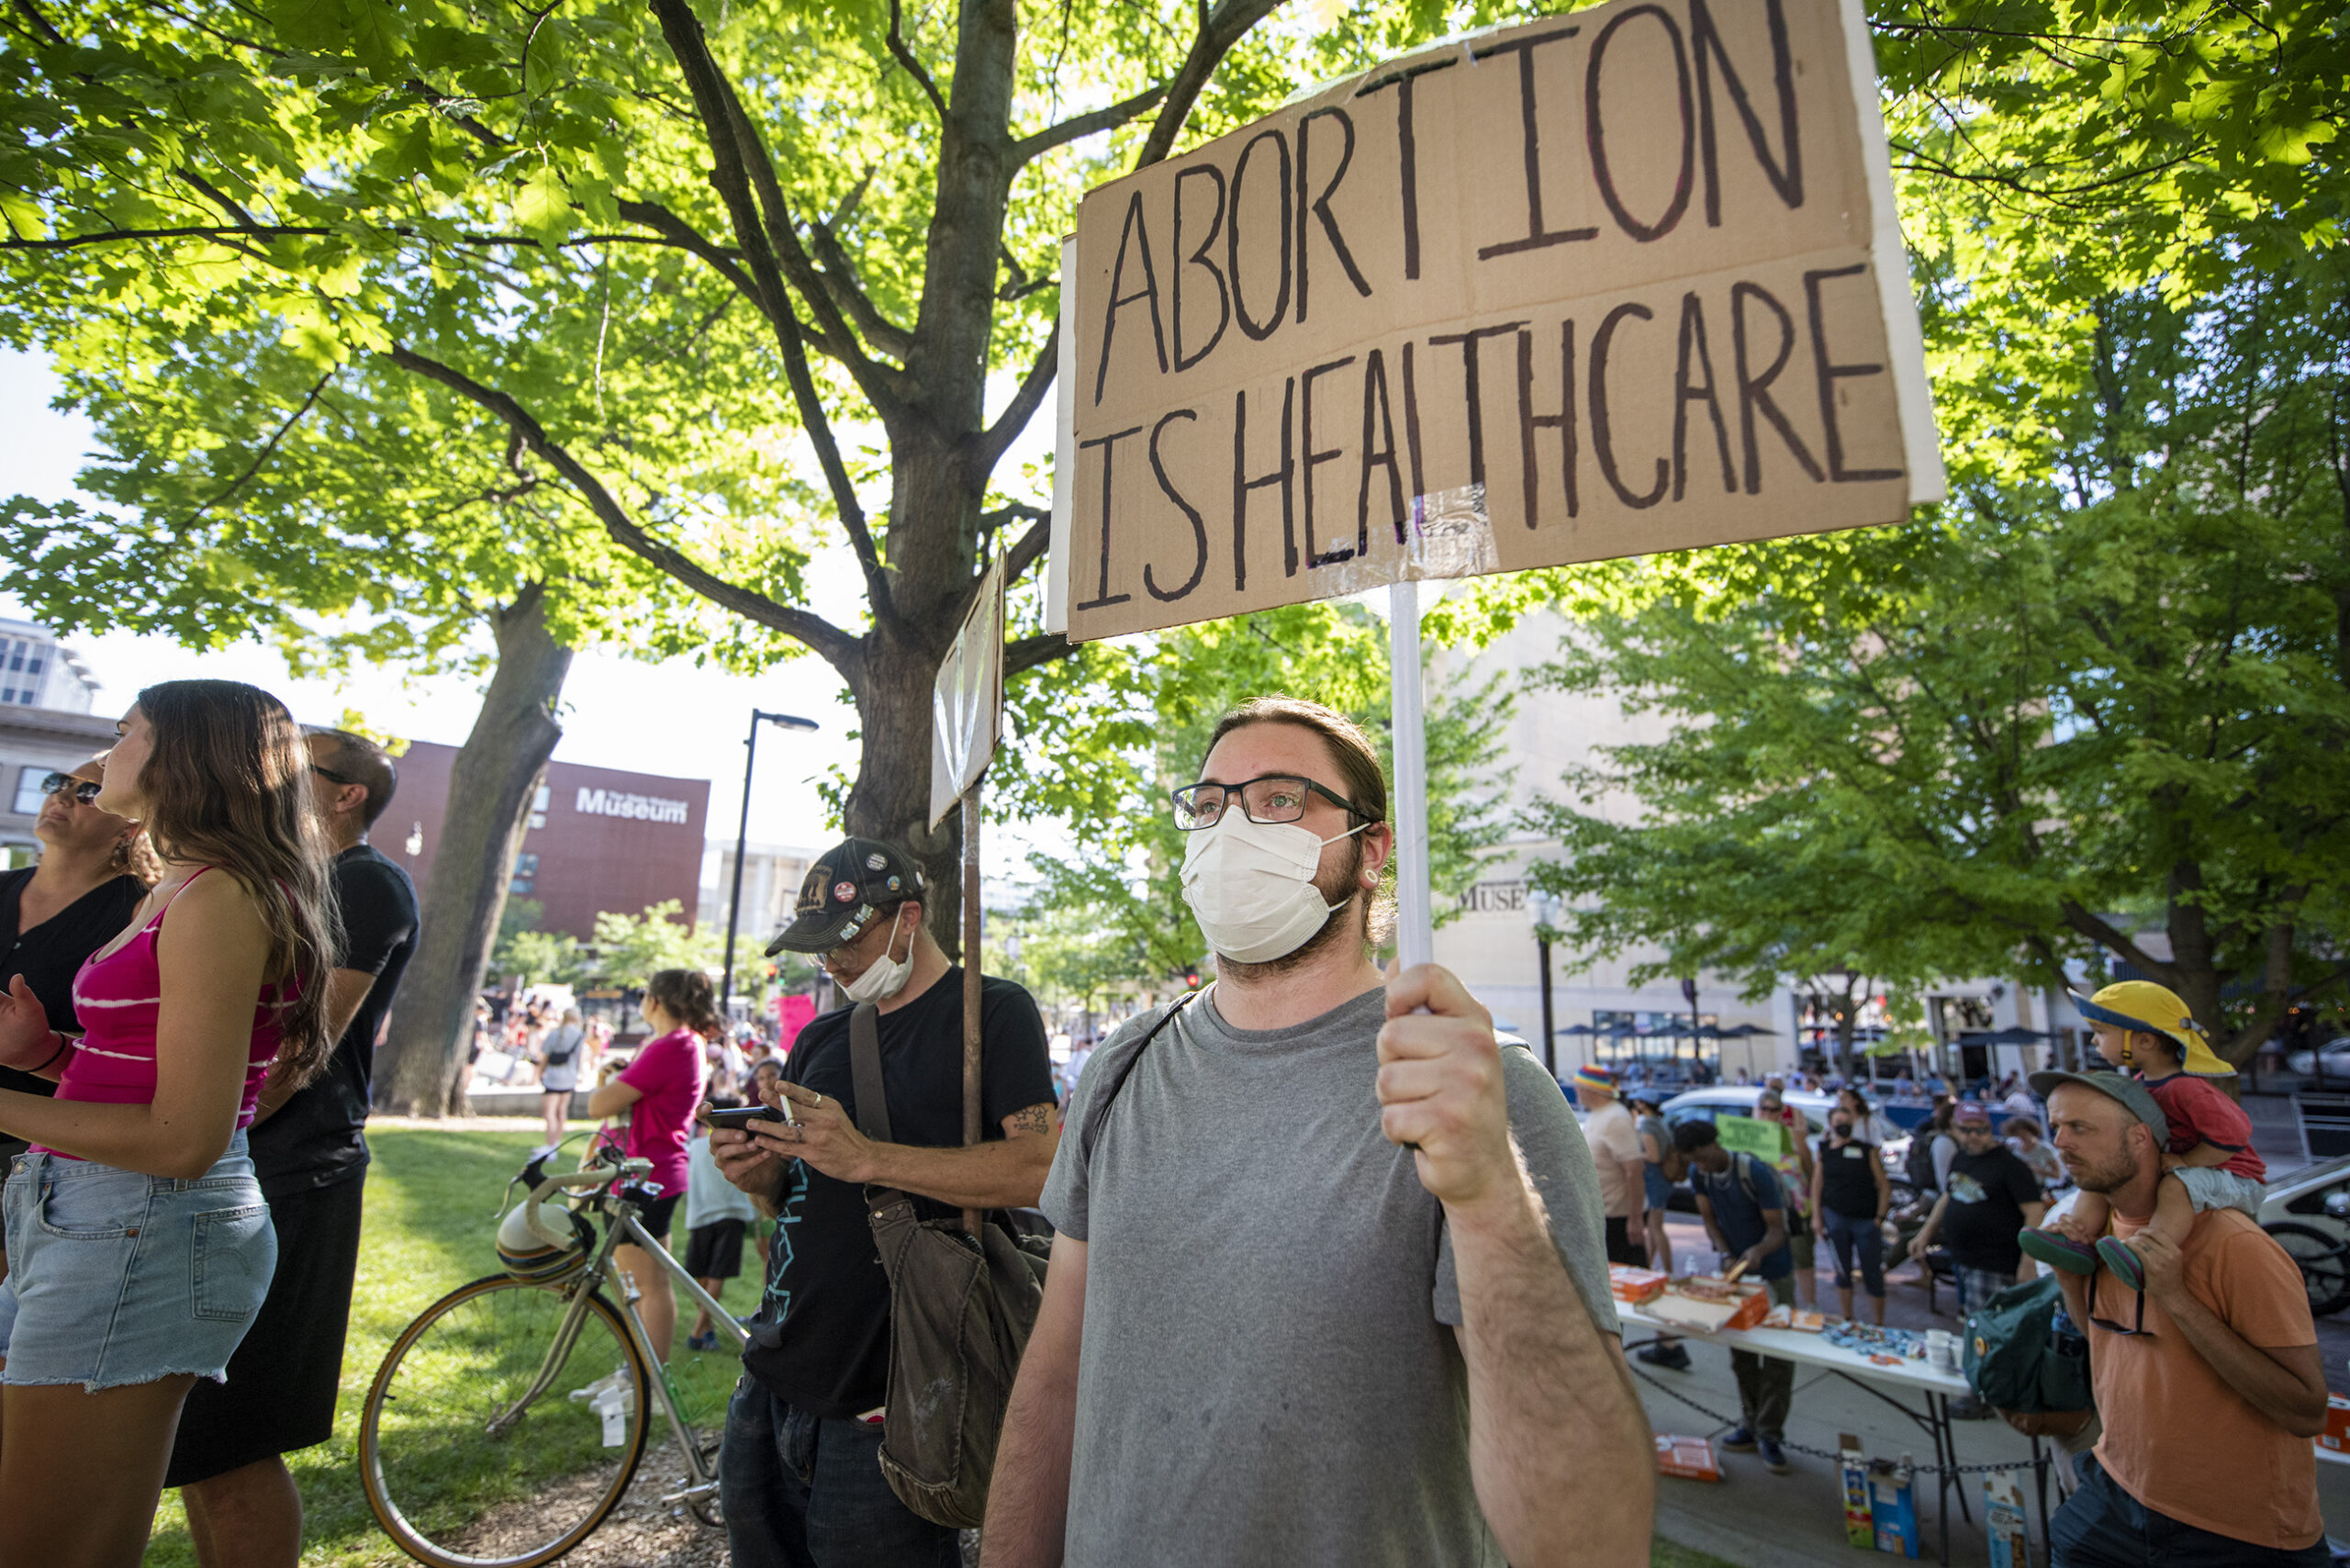 A protester's sign says "abortion is healthcare."